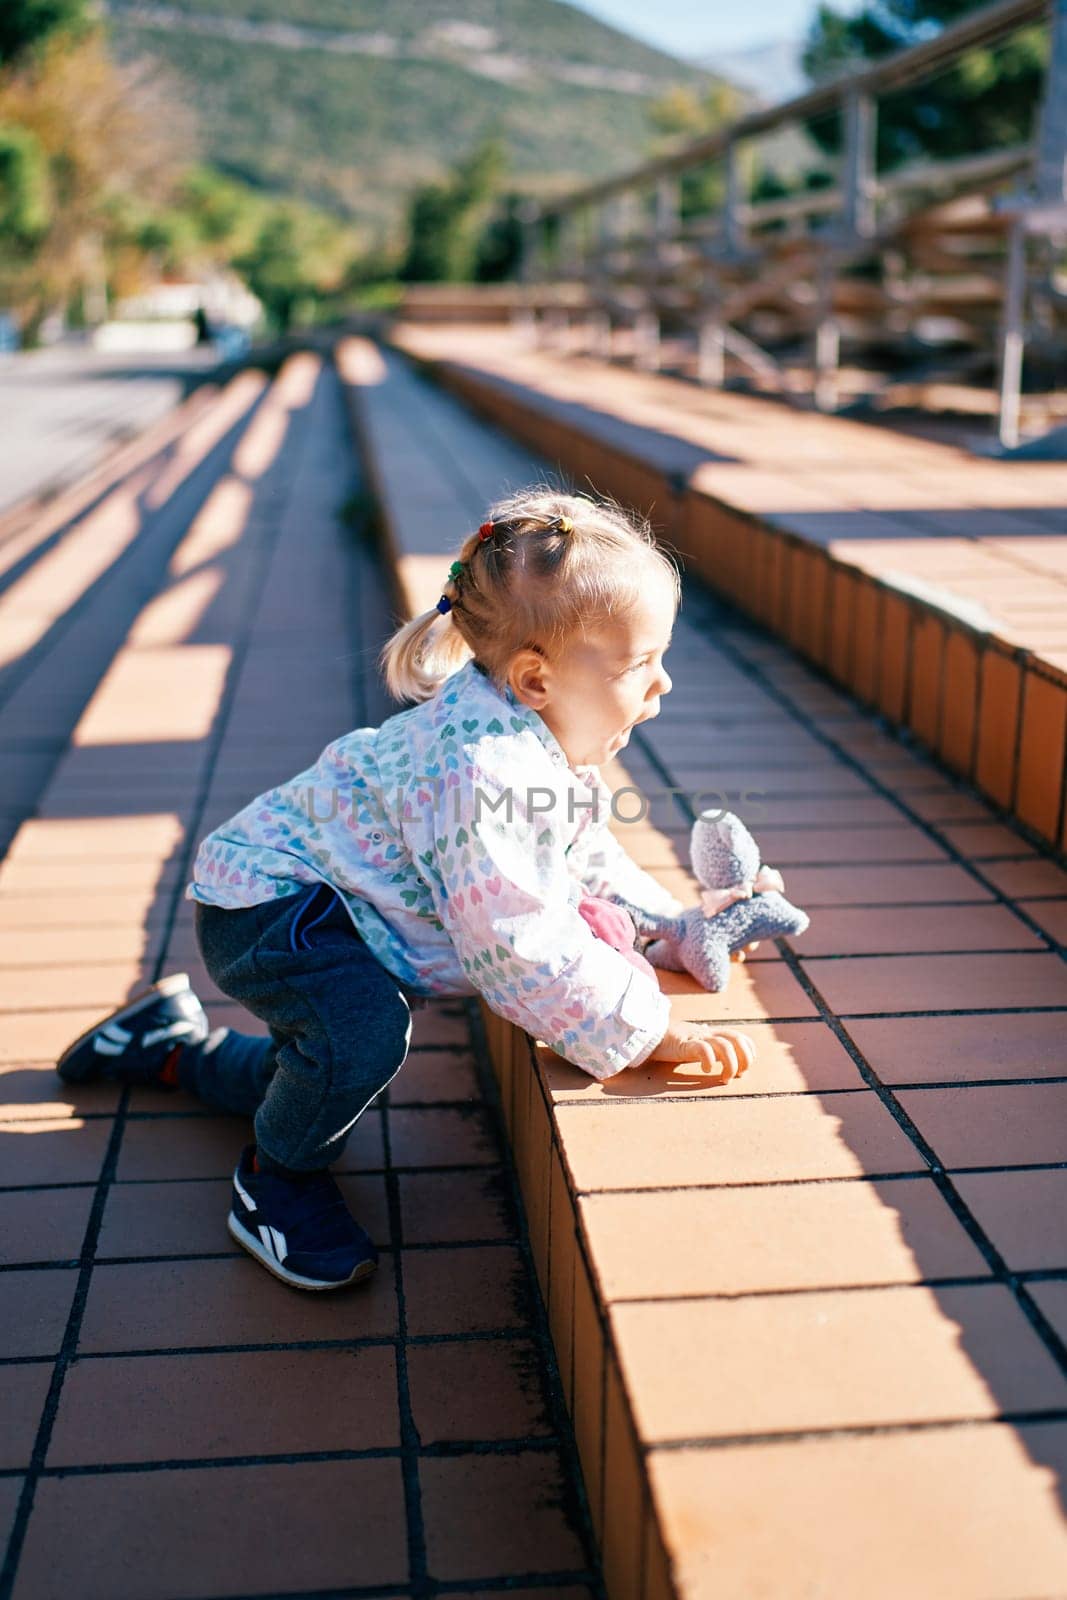 Little girl climbs the steps in the park on all fours with a toy in her hand by Nadtochiy